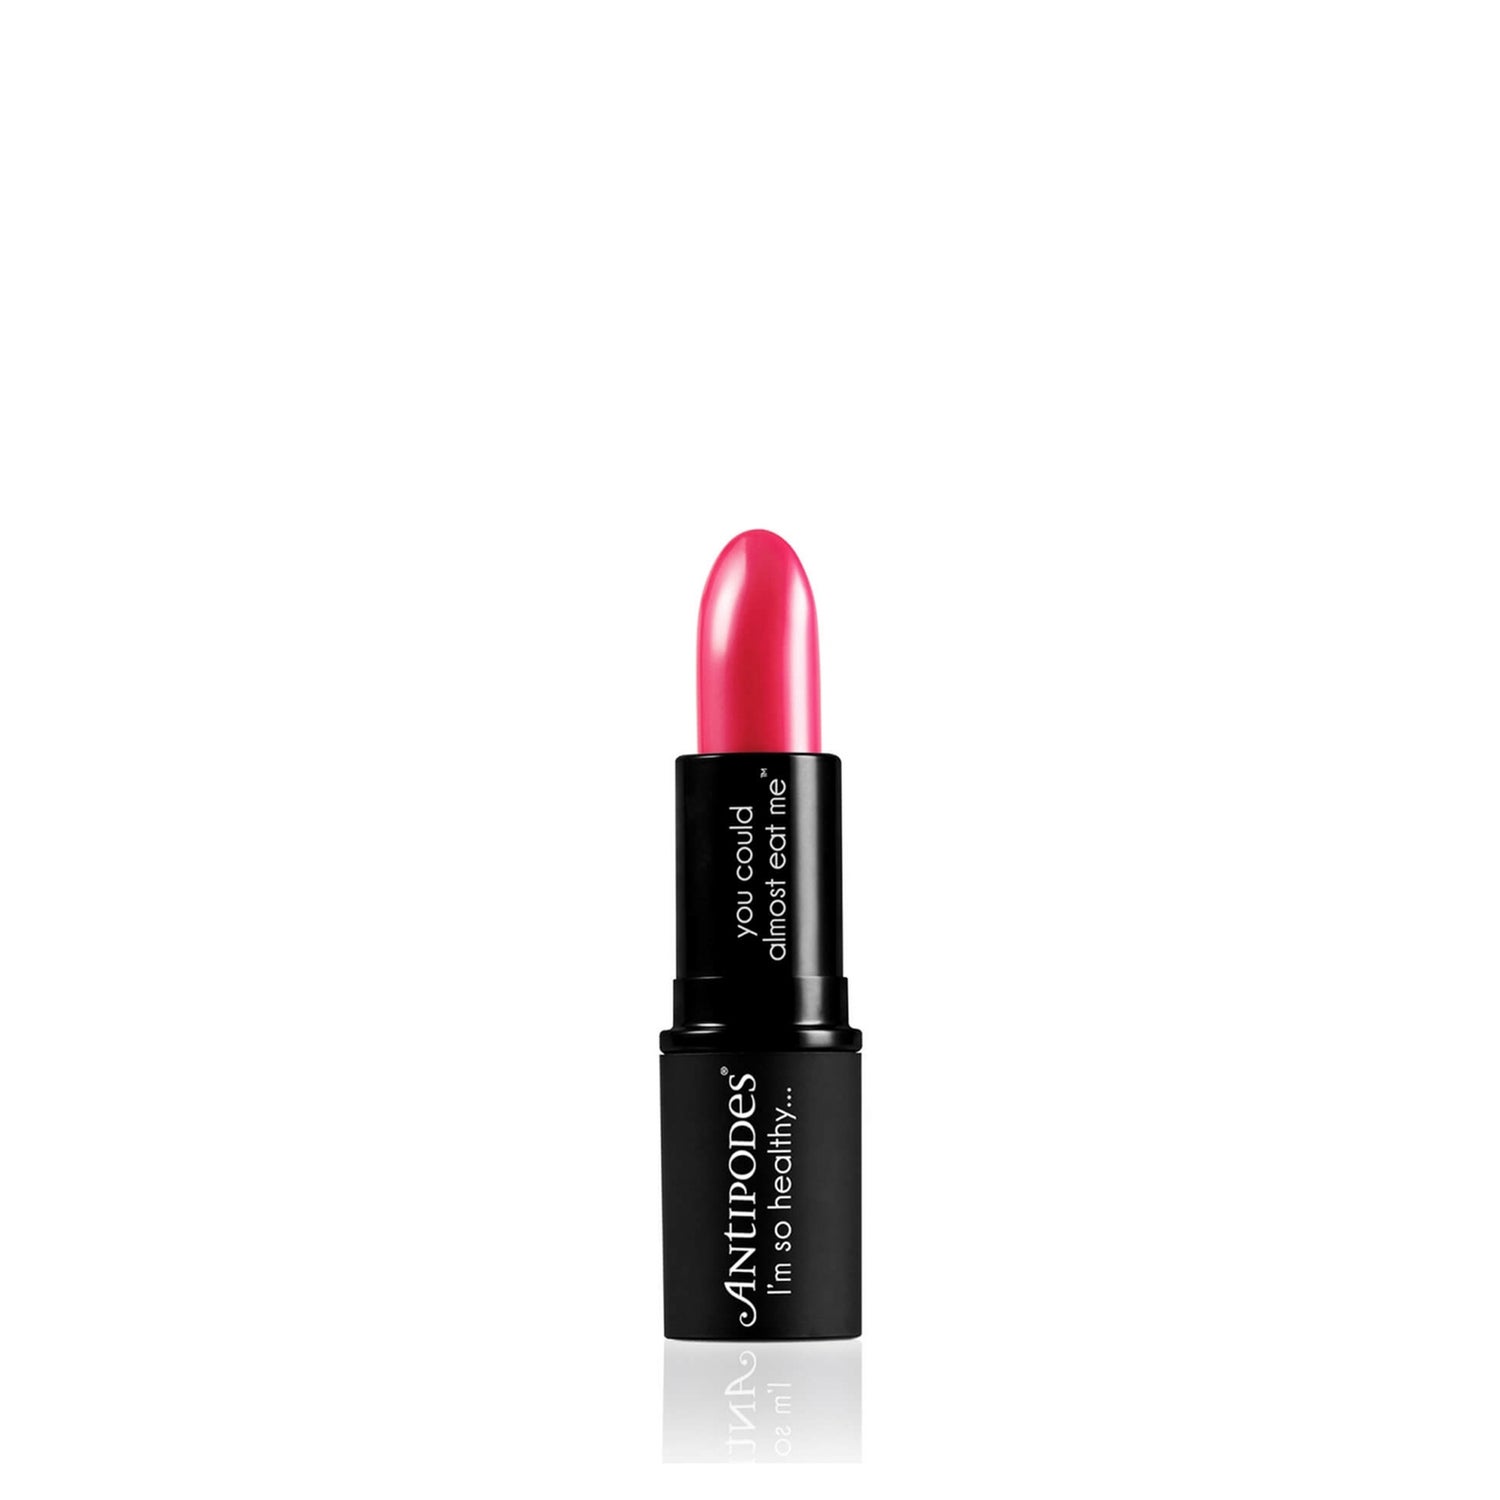 Antipodes rossetto 4 g - Dragon Fruit Pink